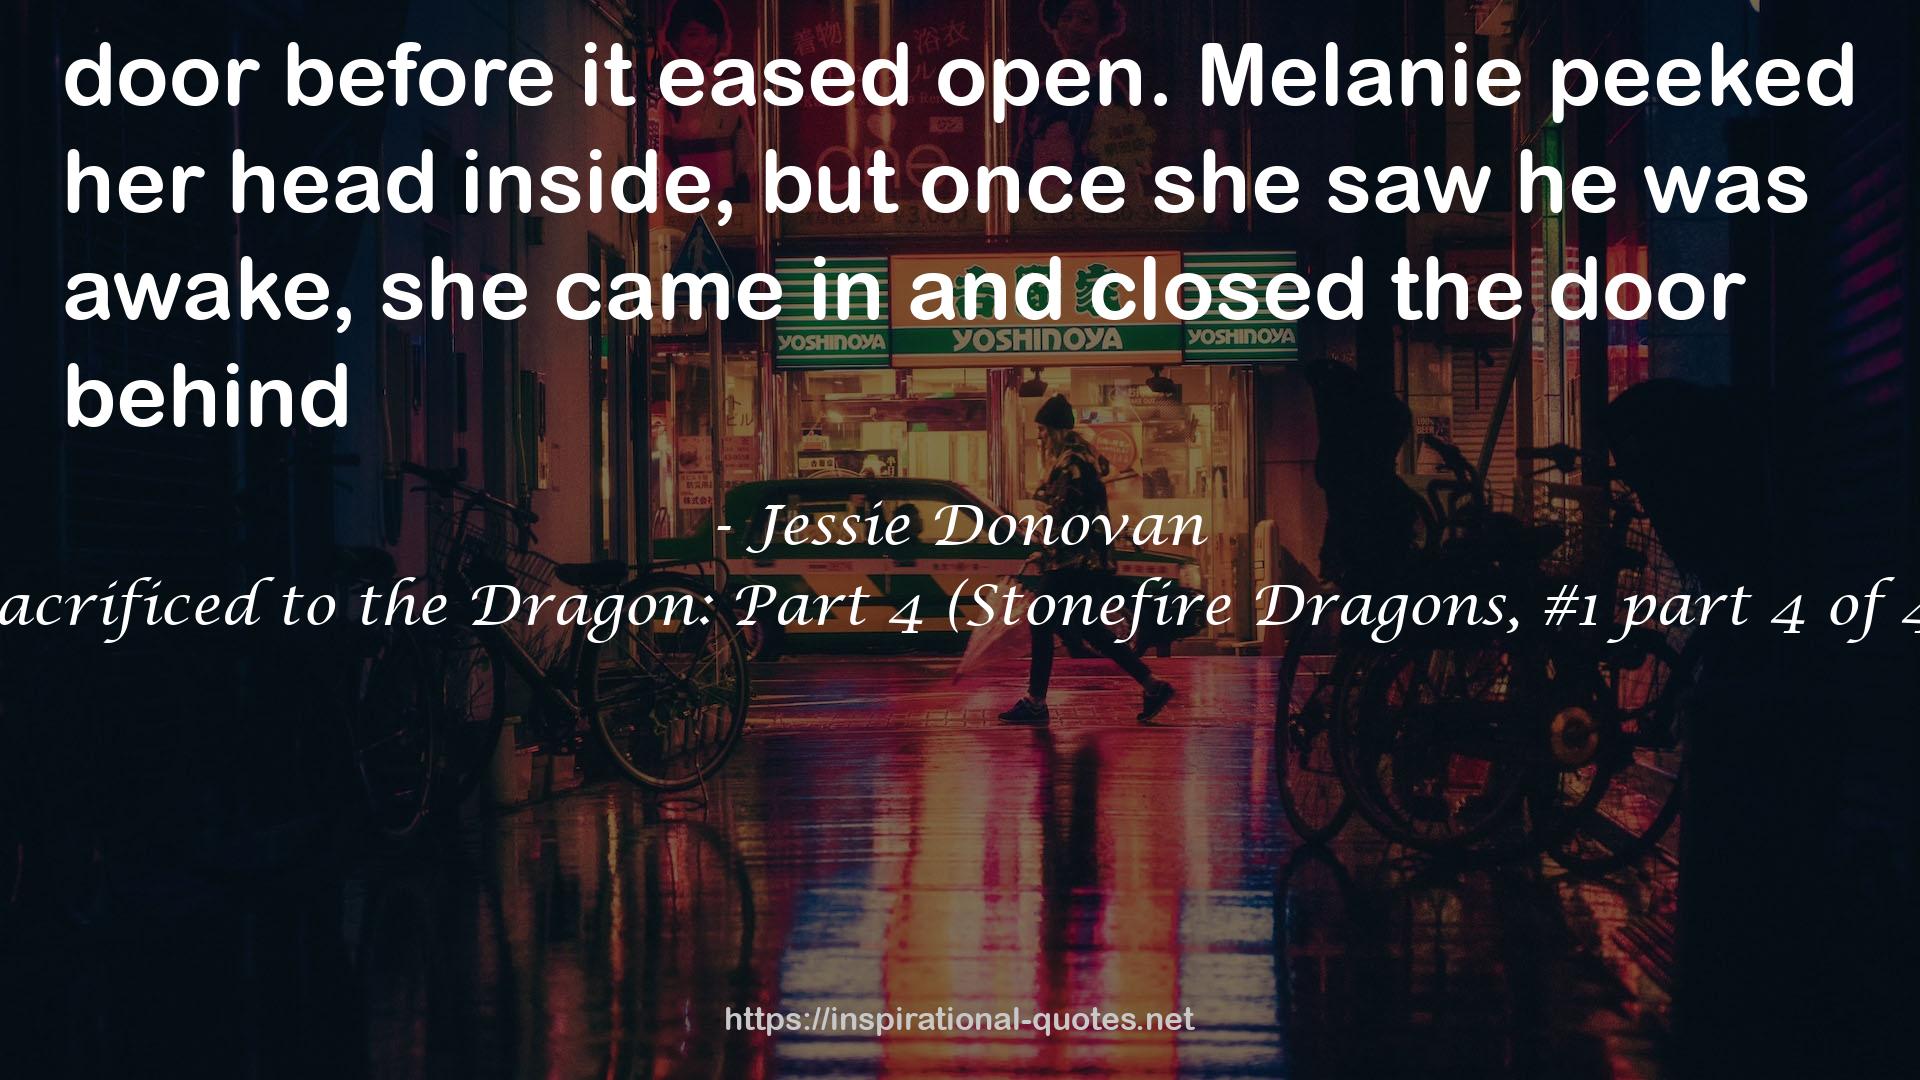 Sacrificed to the Dragon: Part 4 (Stonefire Dragons, #1 part 4 of 4) QUOTES